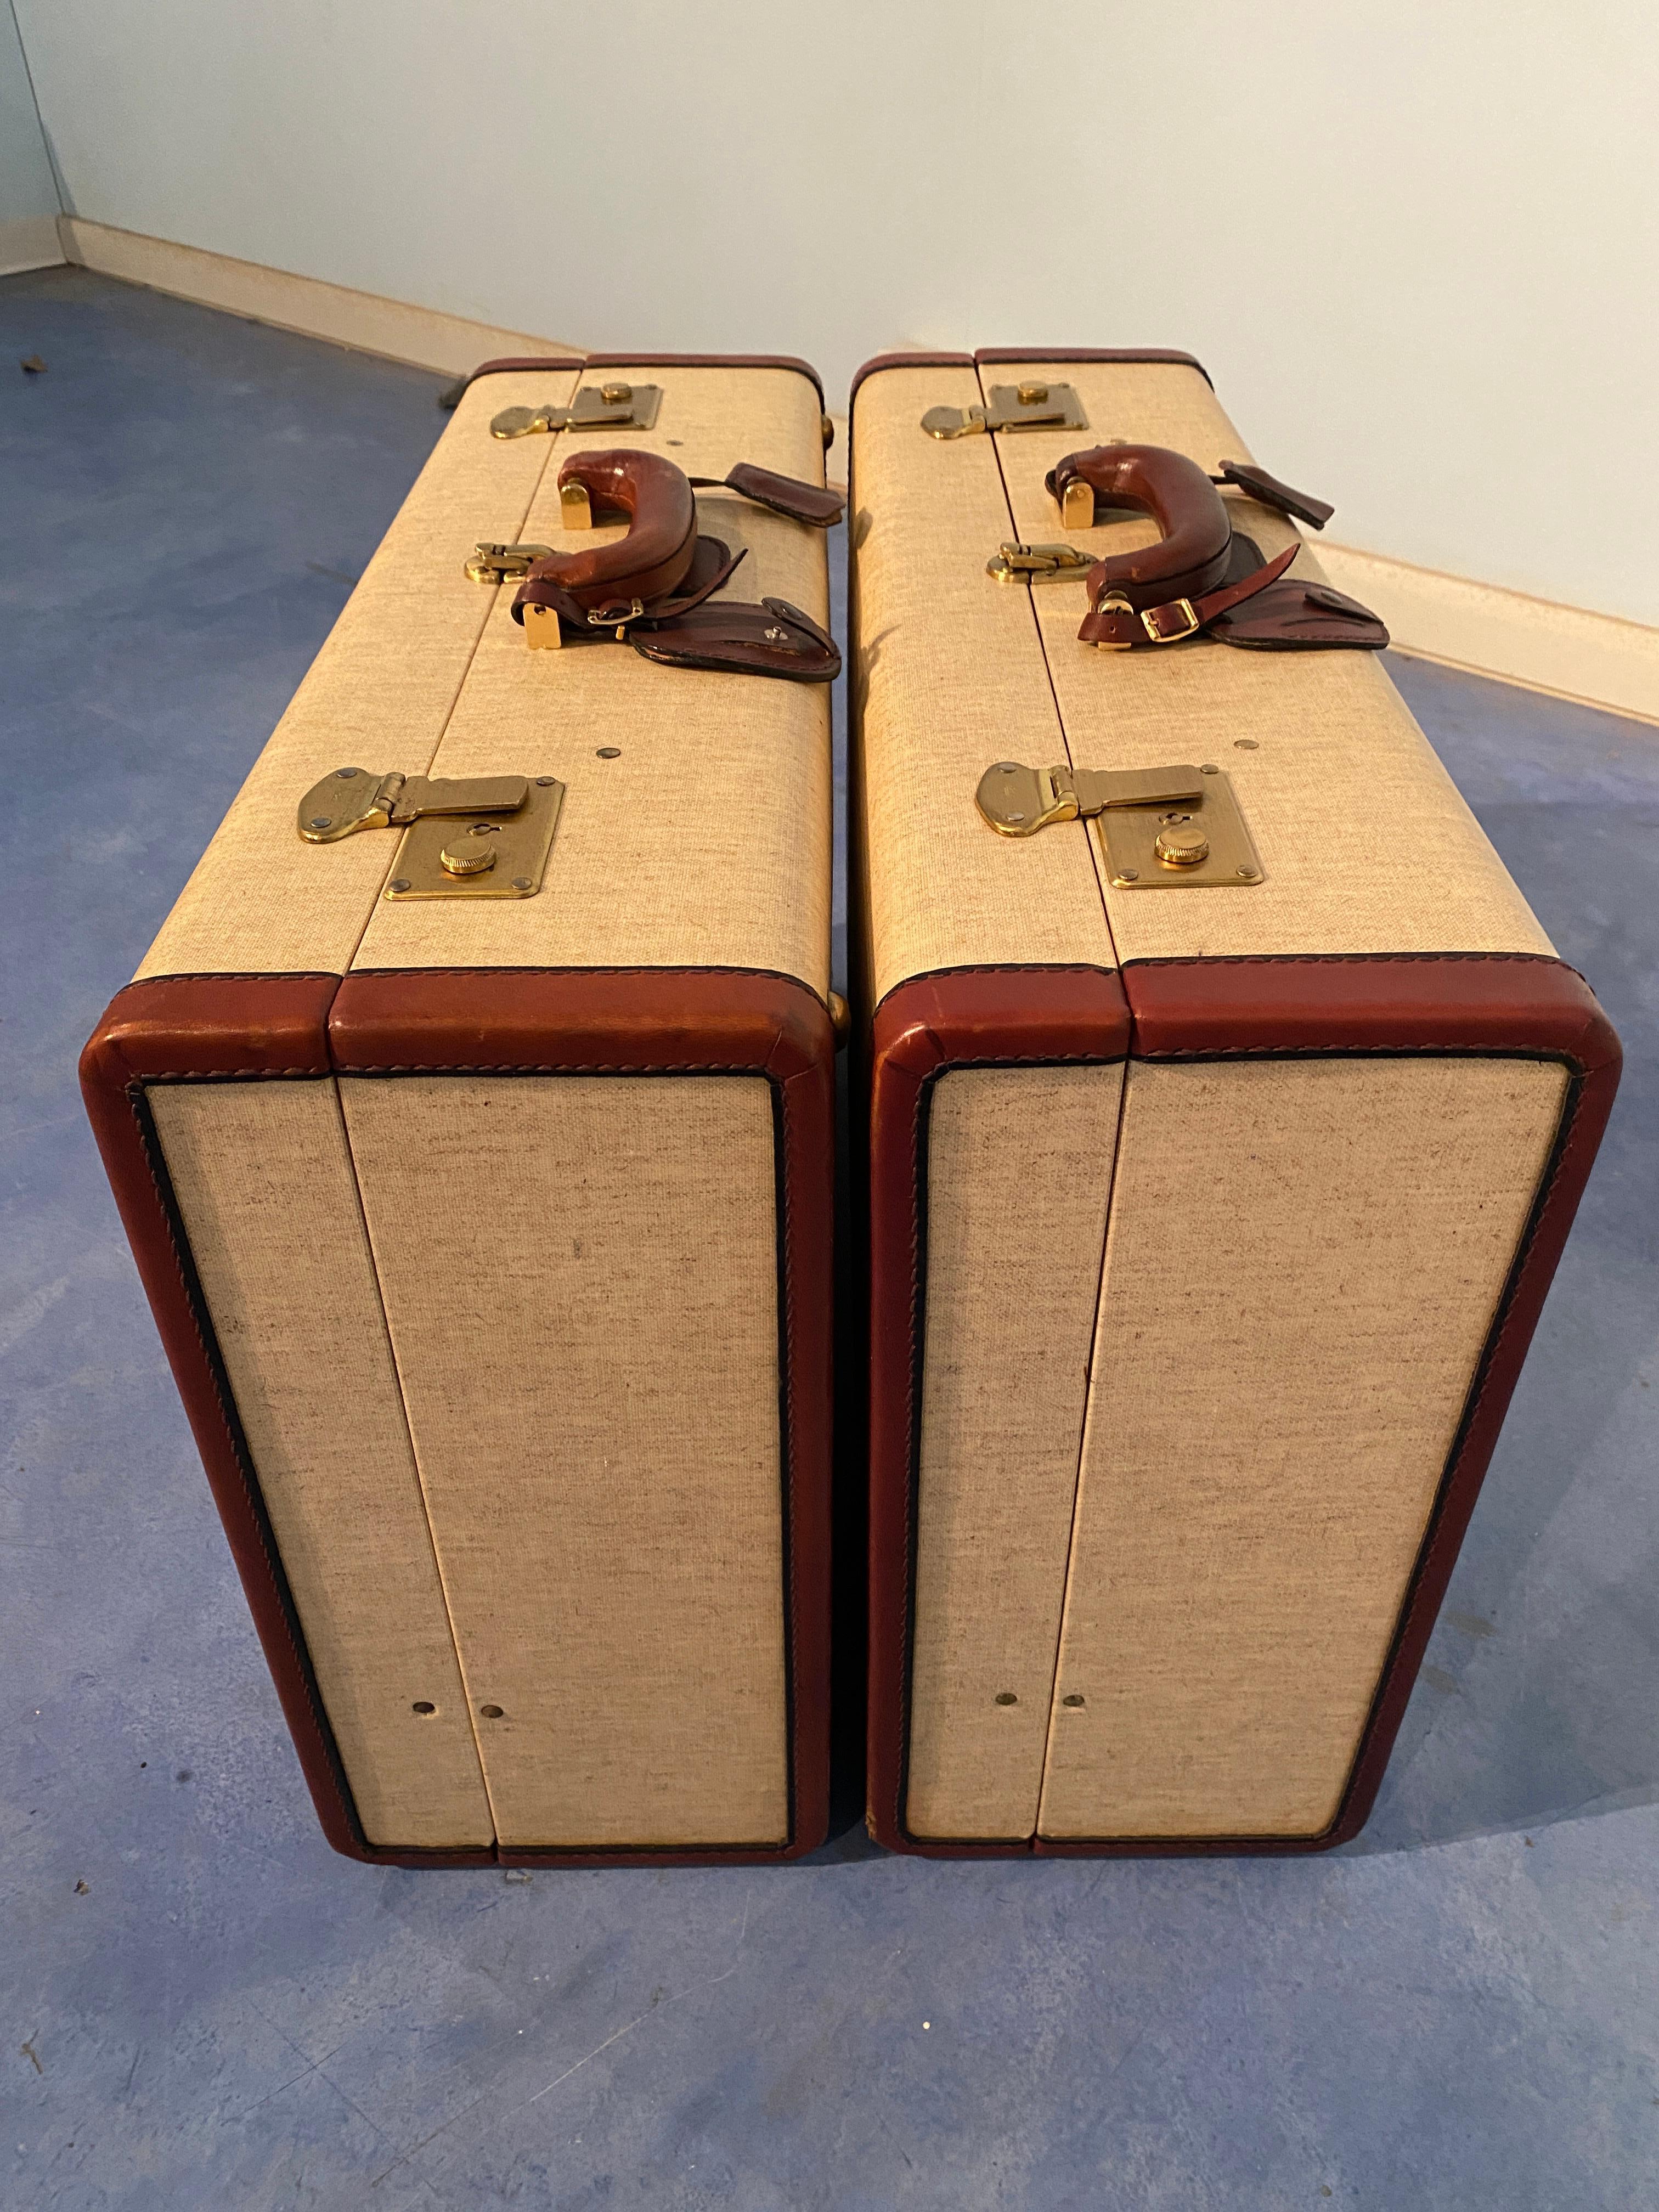 Italian Mid-Century Moder Luggages or Suitcases Mèlange Color, Set of Two, 1960 For Sale 10